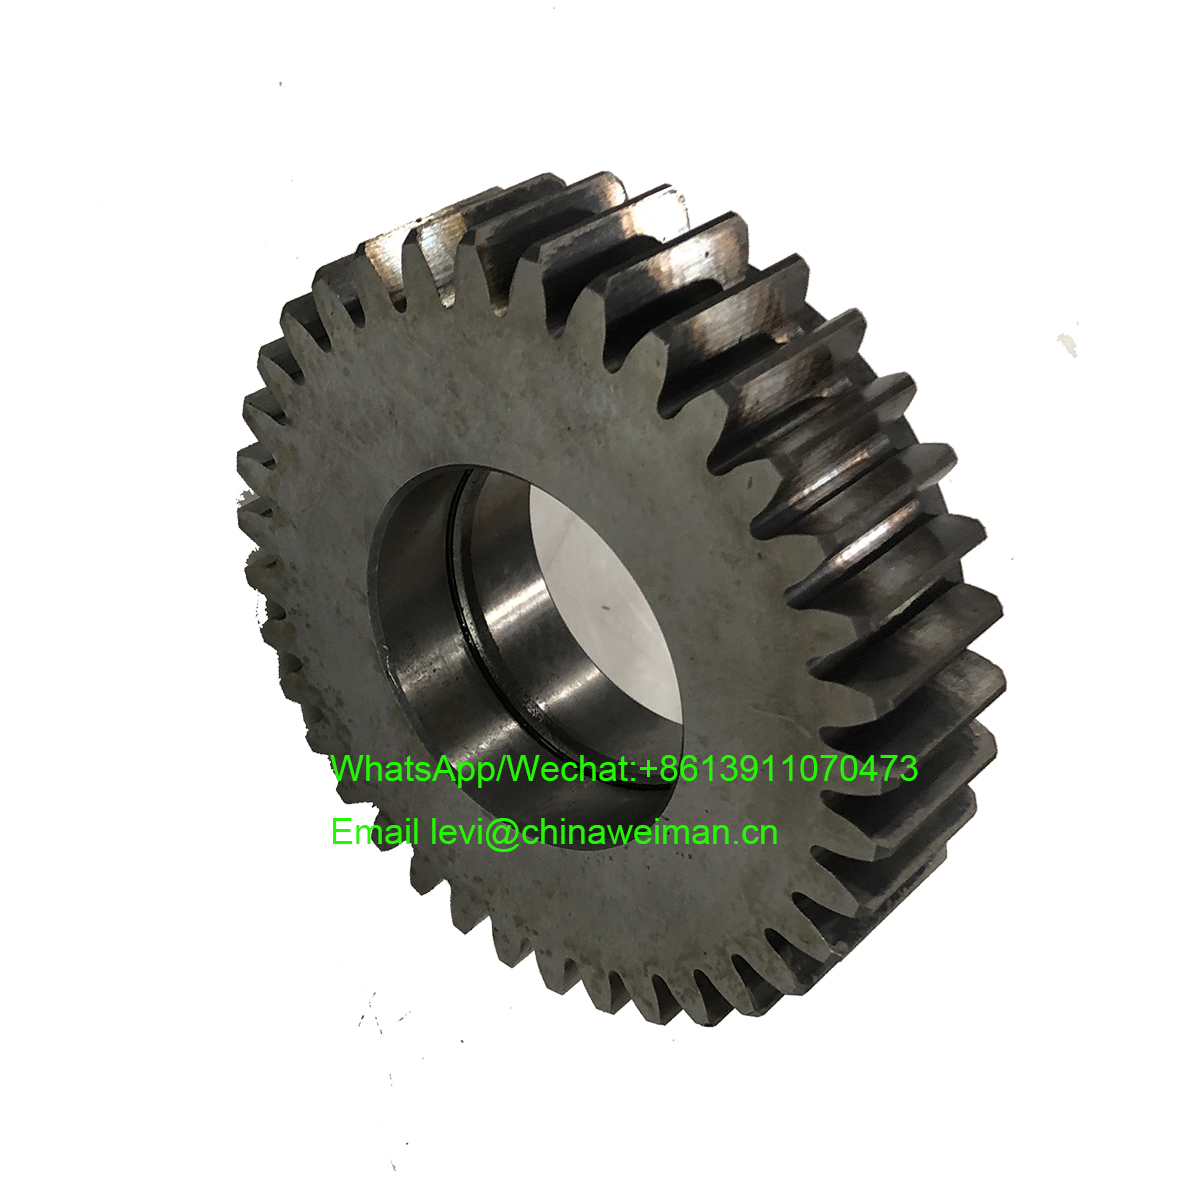 ZF 4WG180 4WG200 Gearbox Spare Parts Spur Gear SP100466 4644308614 7200001518